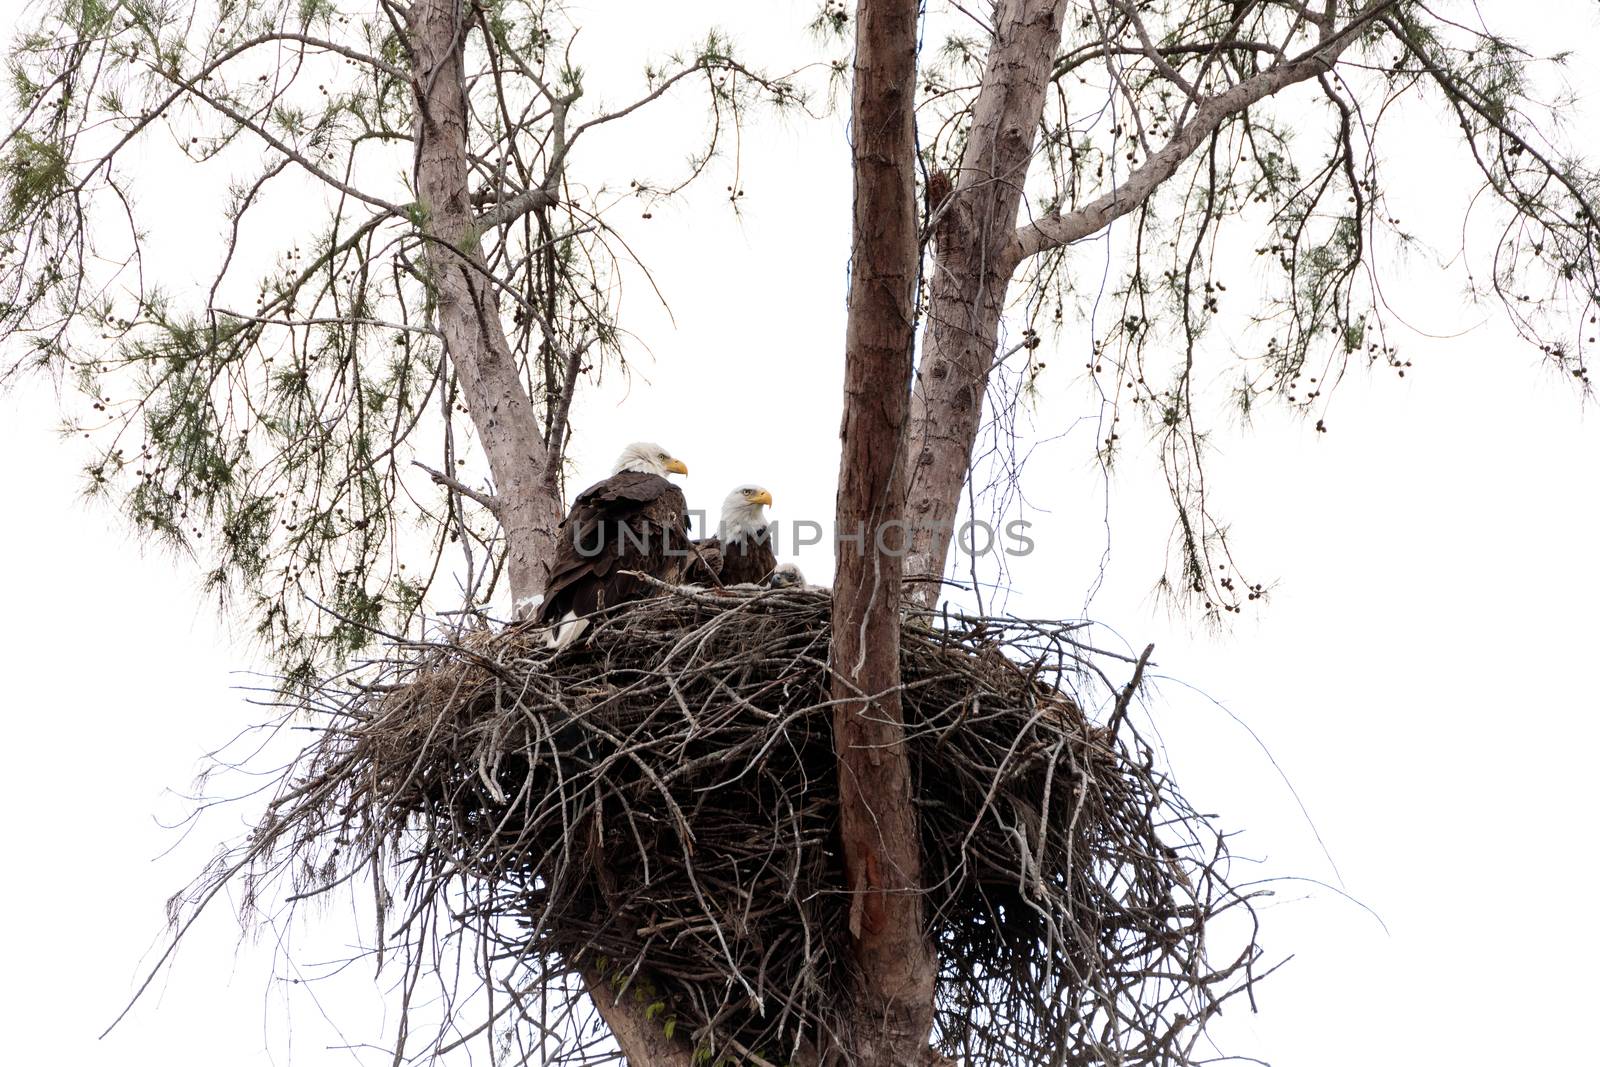 Family of two bald eagle Haliaeetus leucocephalus parents with their nest of chicks on Marco Island, Florida in the winter.